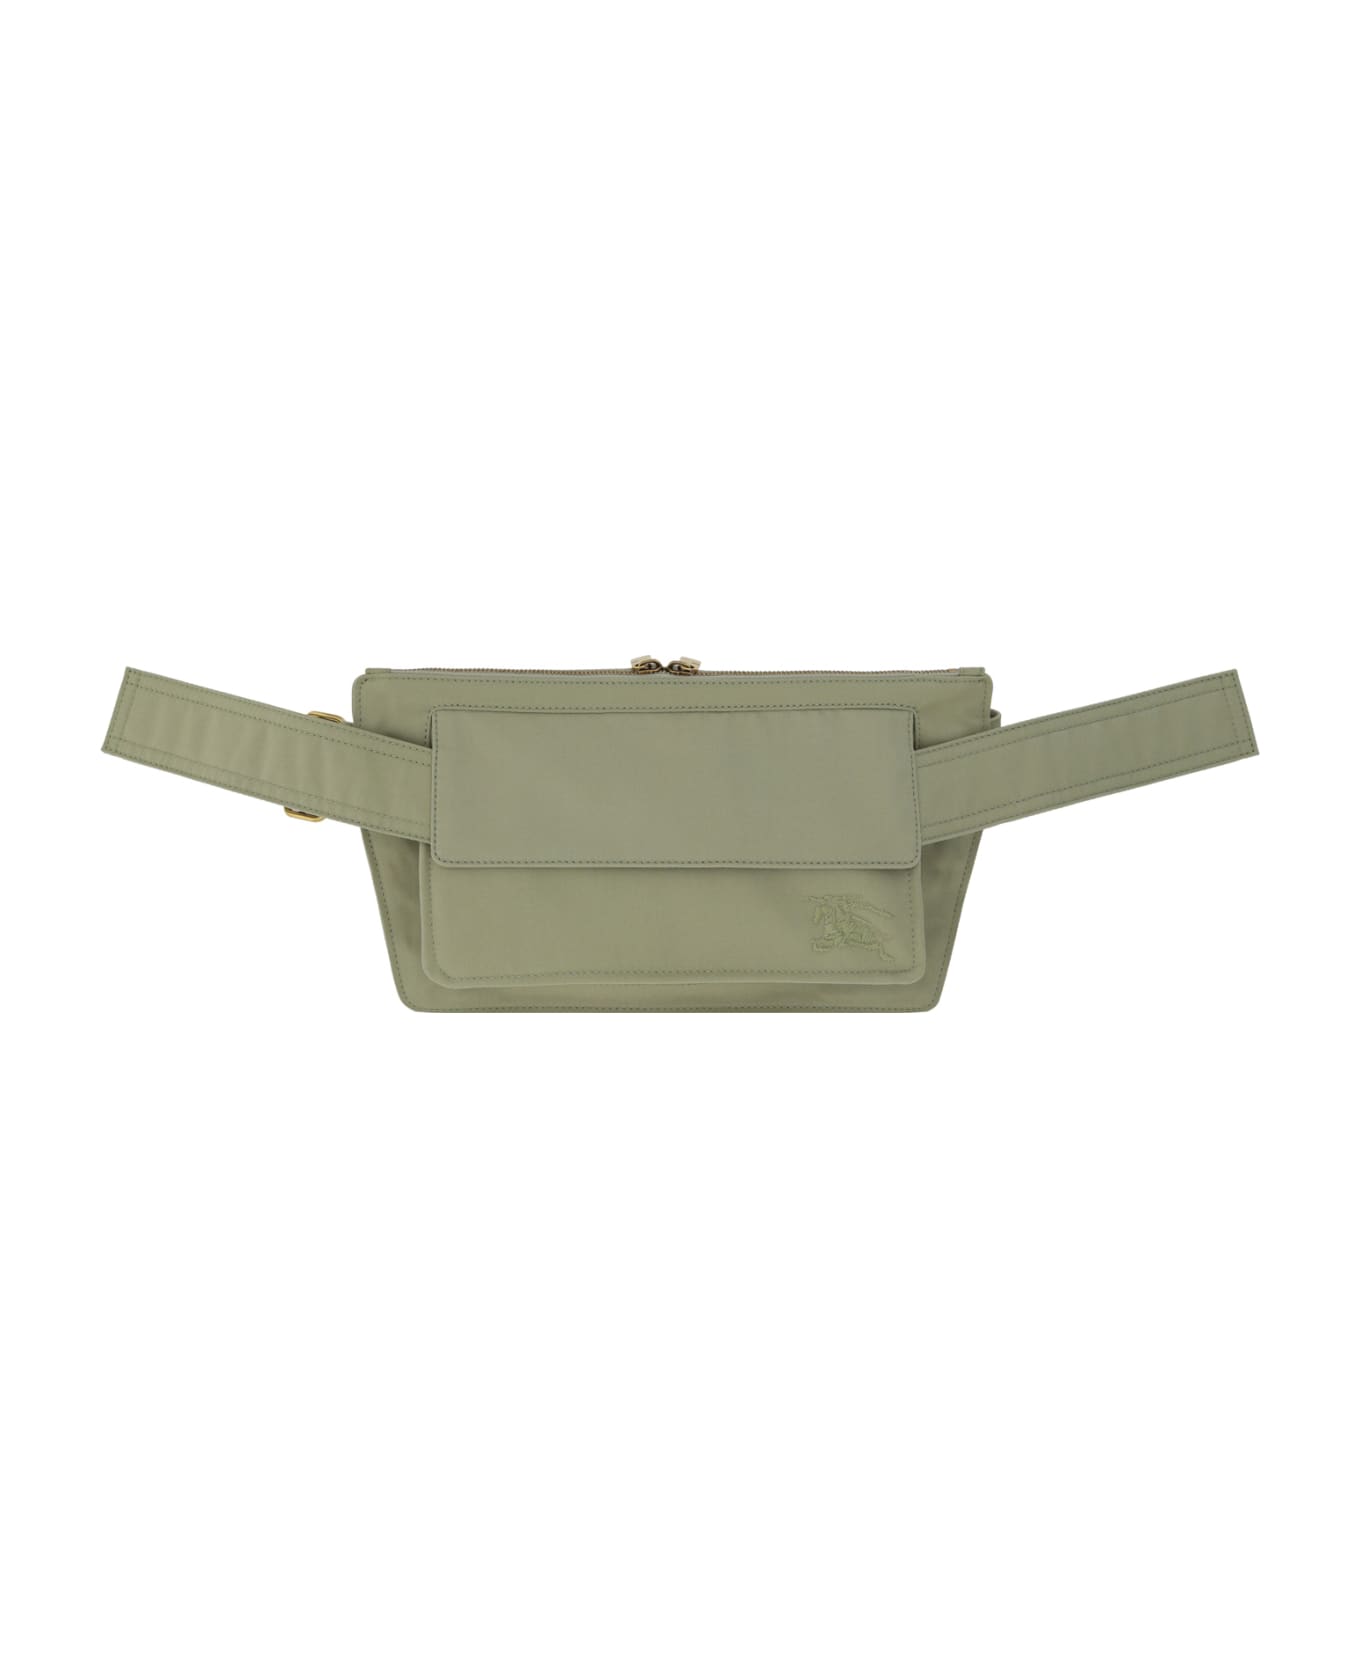 Burberry Trench Fanny Pack - Hunter